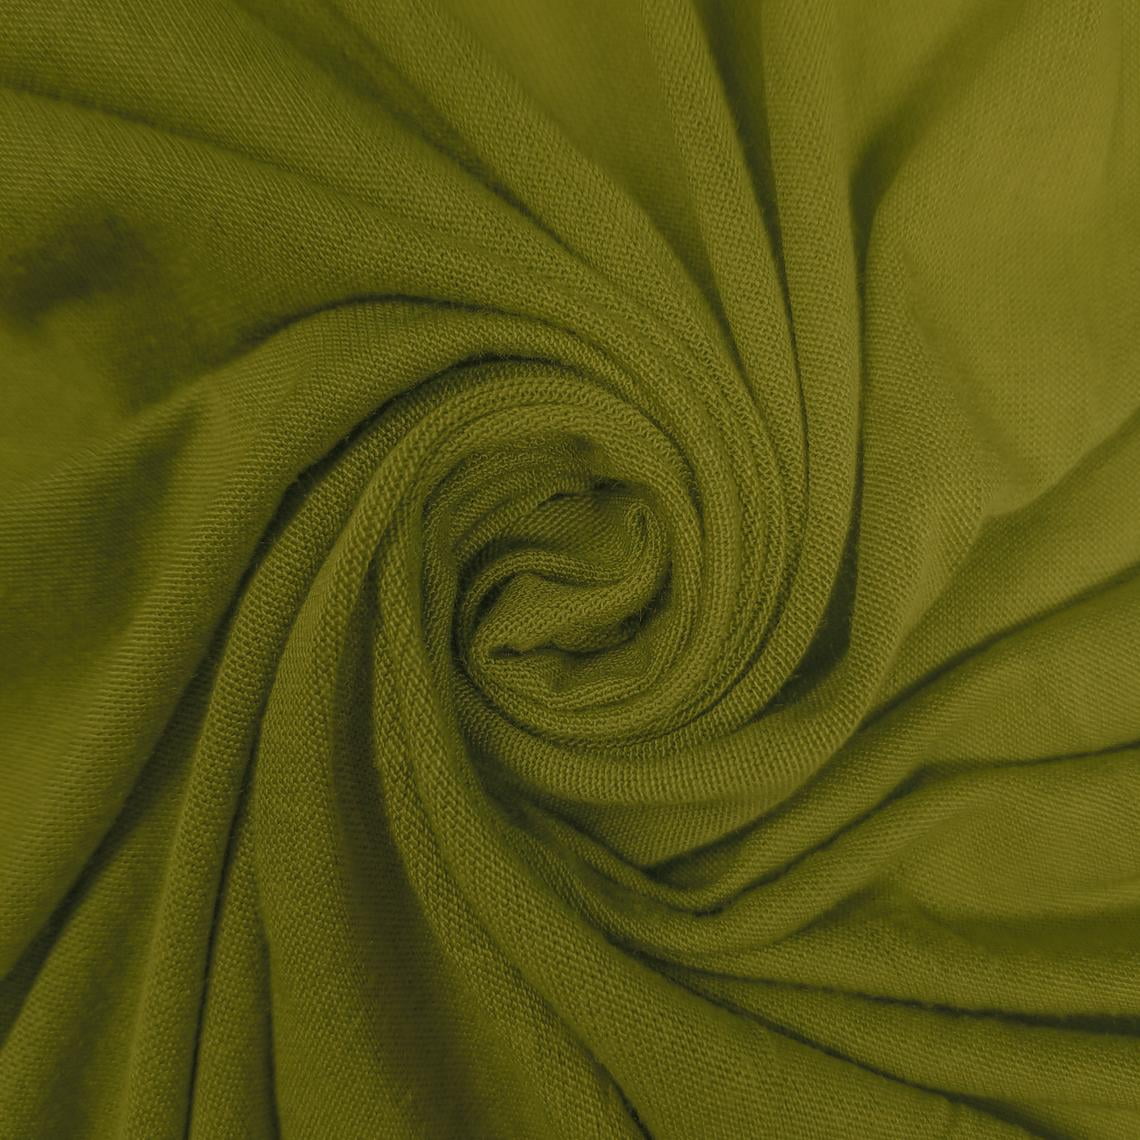 Green Mint LT Knit Fabric, 160GSM - Light Weight: Rayon Jersey Knit Fabric,  Causal Jersey Knit Fabric, Knitting Fabric by The Yard - 1 Yard